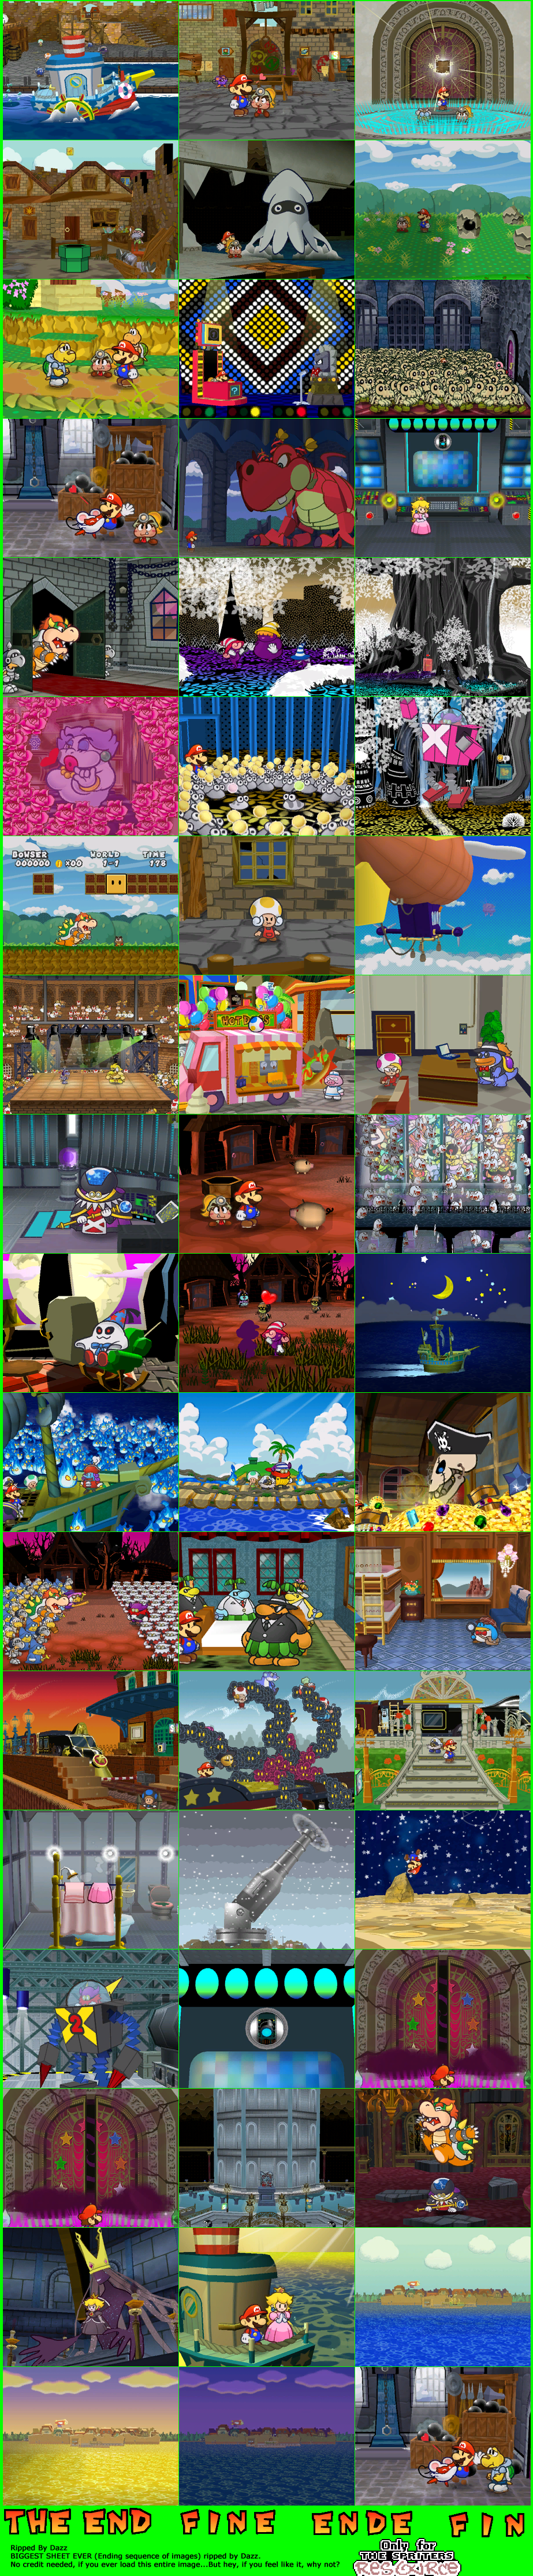 Paper Mario: The Thousand-Year Door - Ending Pictures